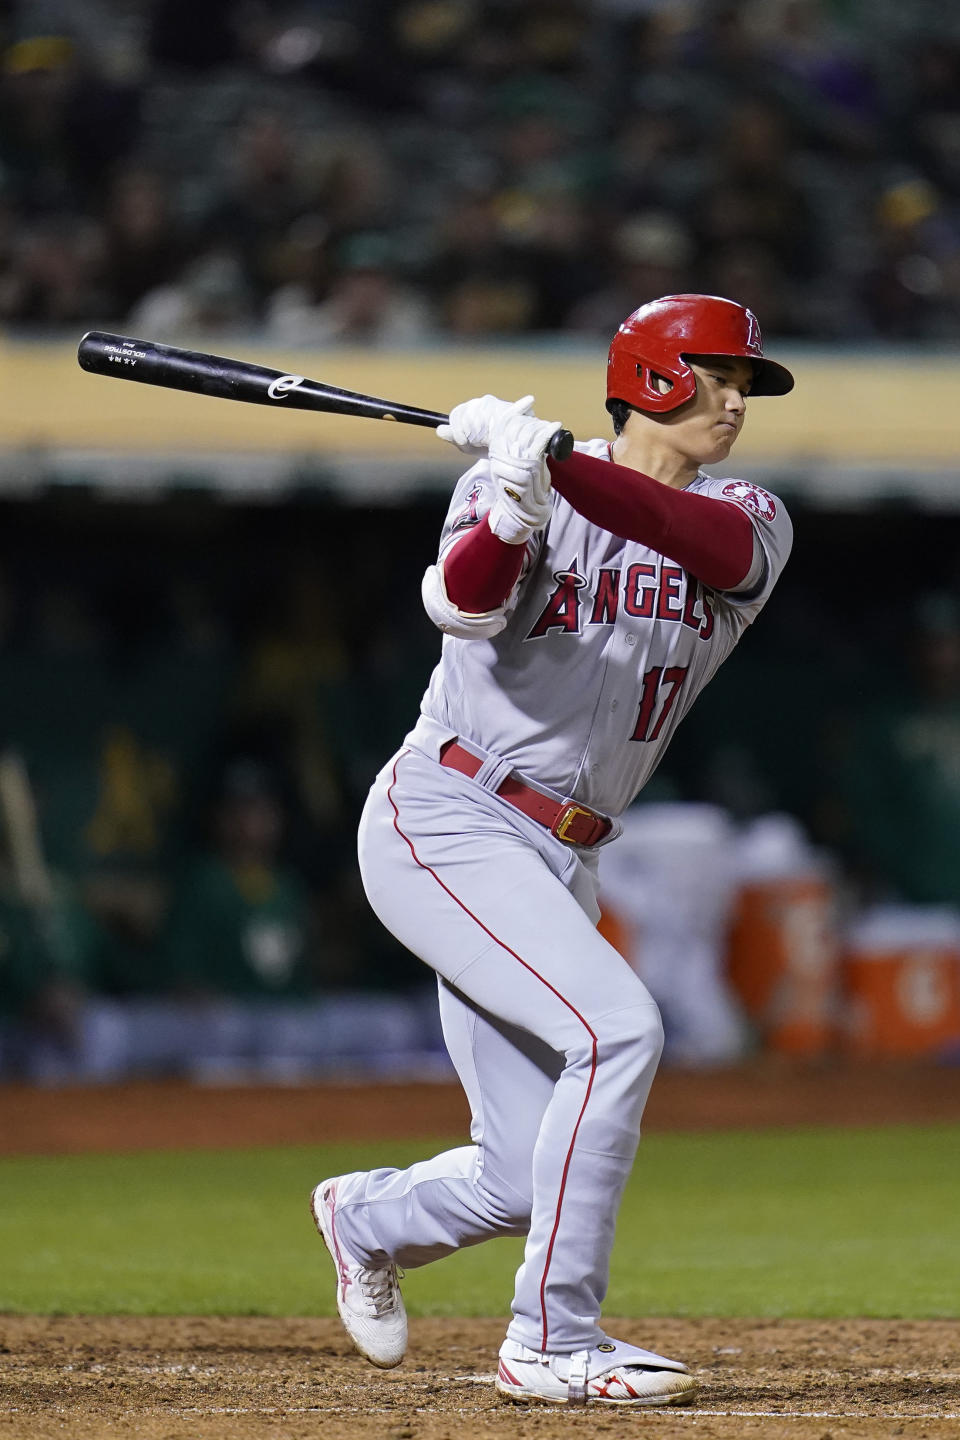 Los Angeles Angels' Shohei Ohtani strikes out against the Oakland Athletics during the eighth inning of a baseball game in Oakland, Calif., Tuesday, Oct. 4, 2022. (AP Photo/Godofredo A. Vásquez)